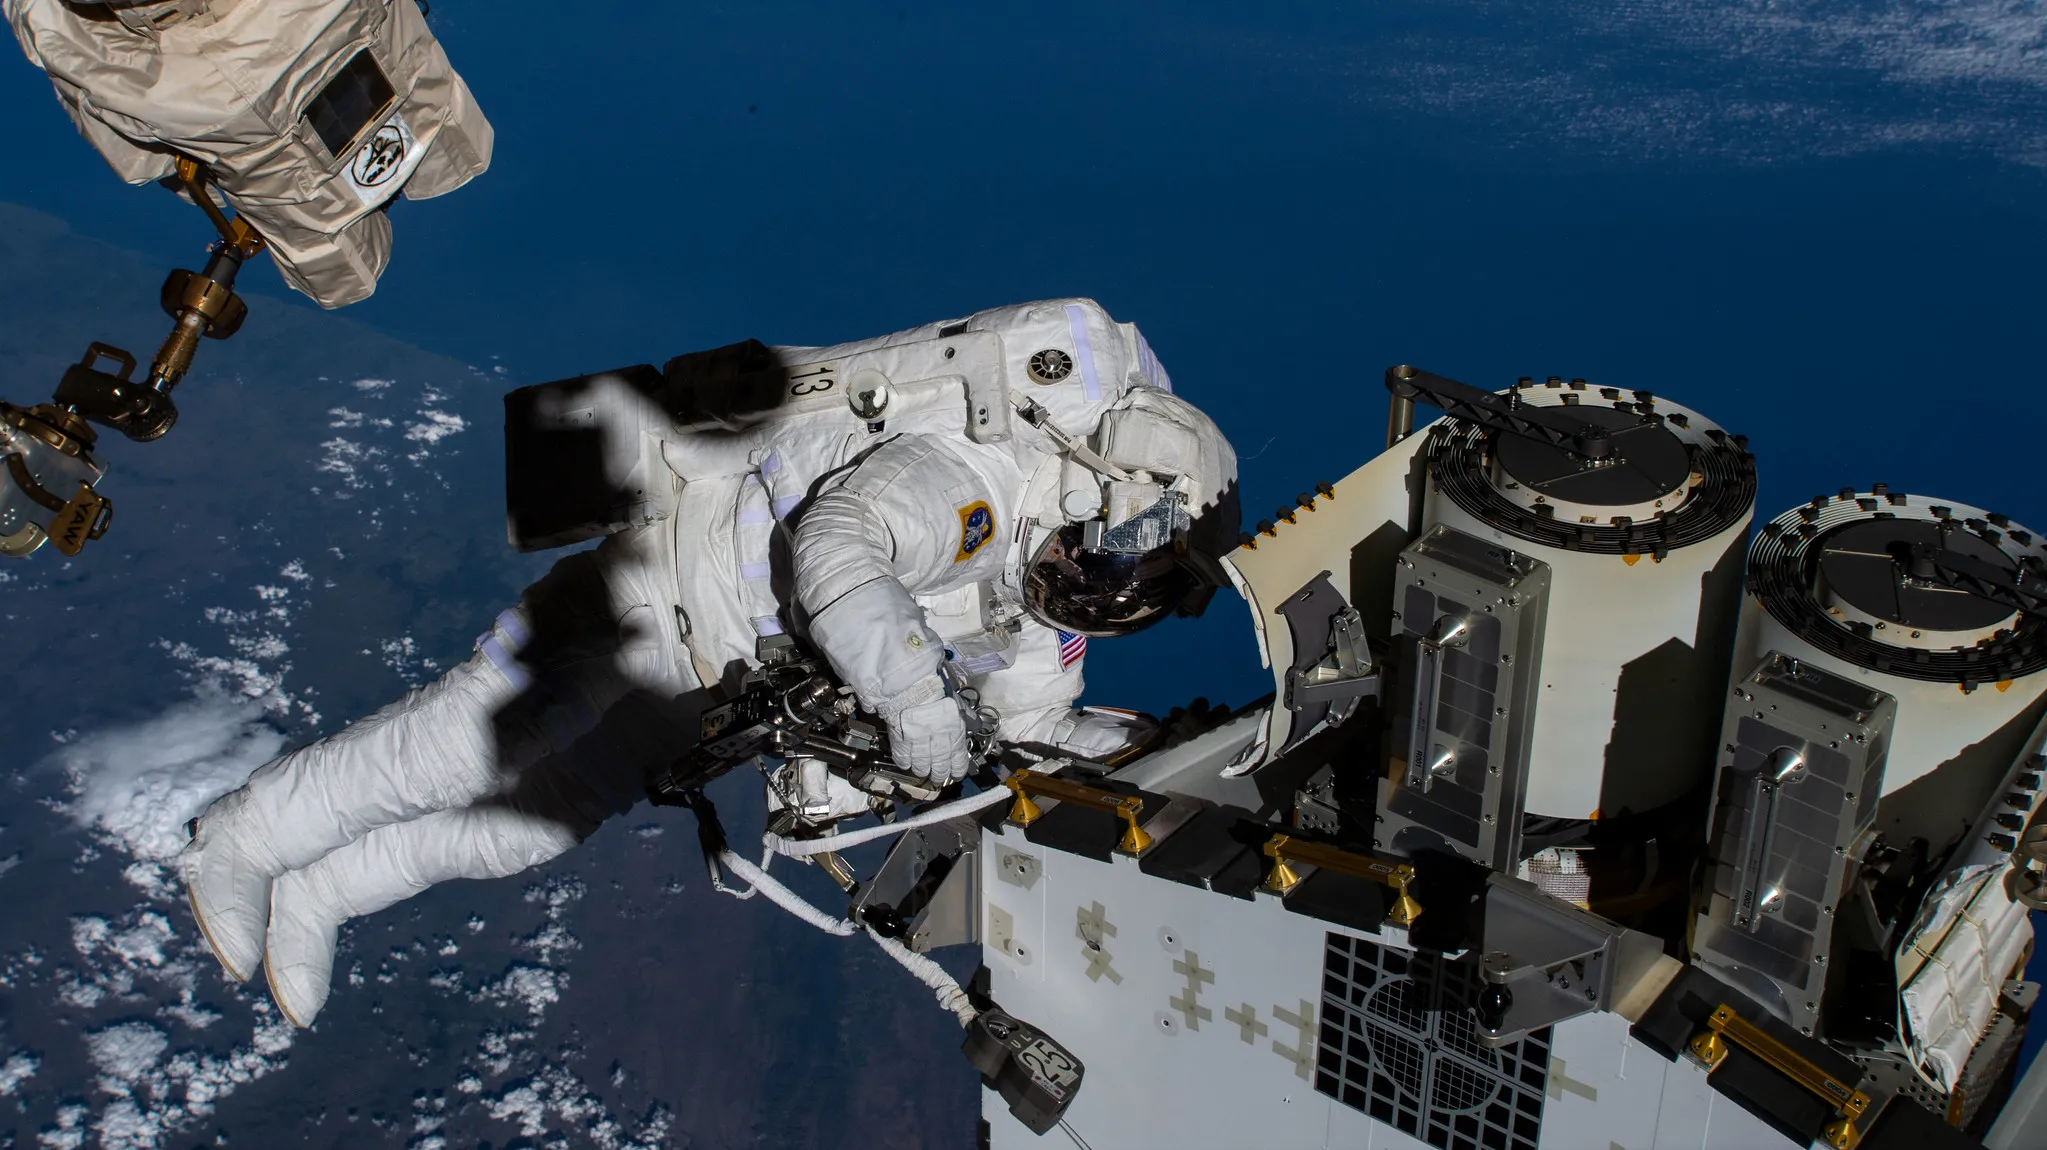 NASA Is Now Accepting Applications for New Astronauts To Go on Space Missions